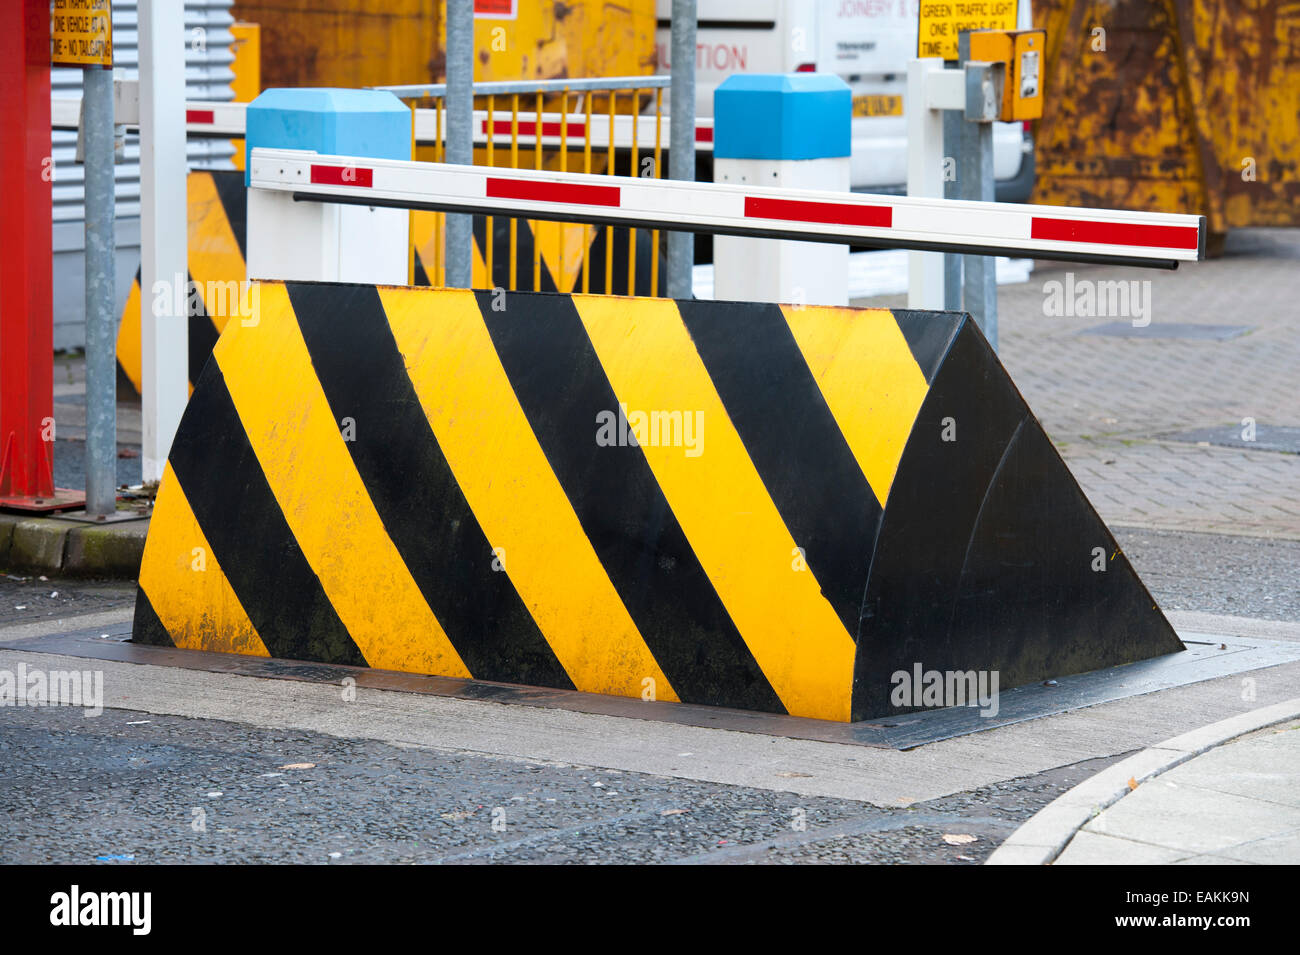 hydraulic anti-terrorist road blocker security barrier also known as rising steps or rising kerb Stock Photo